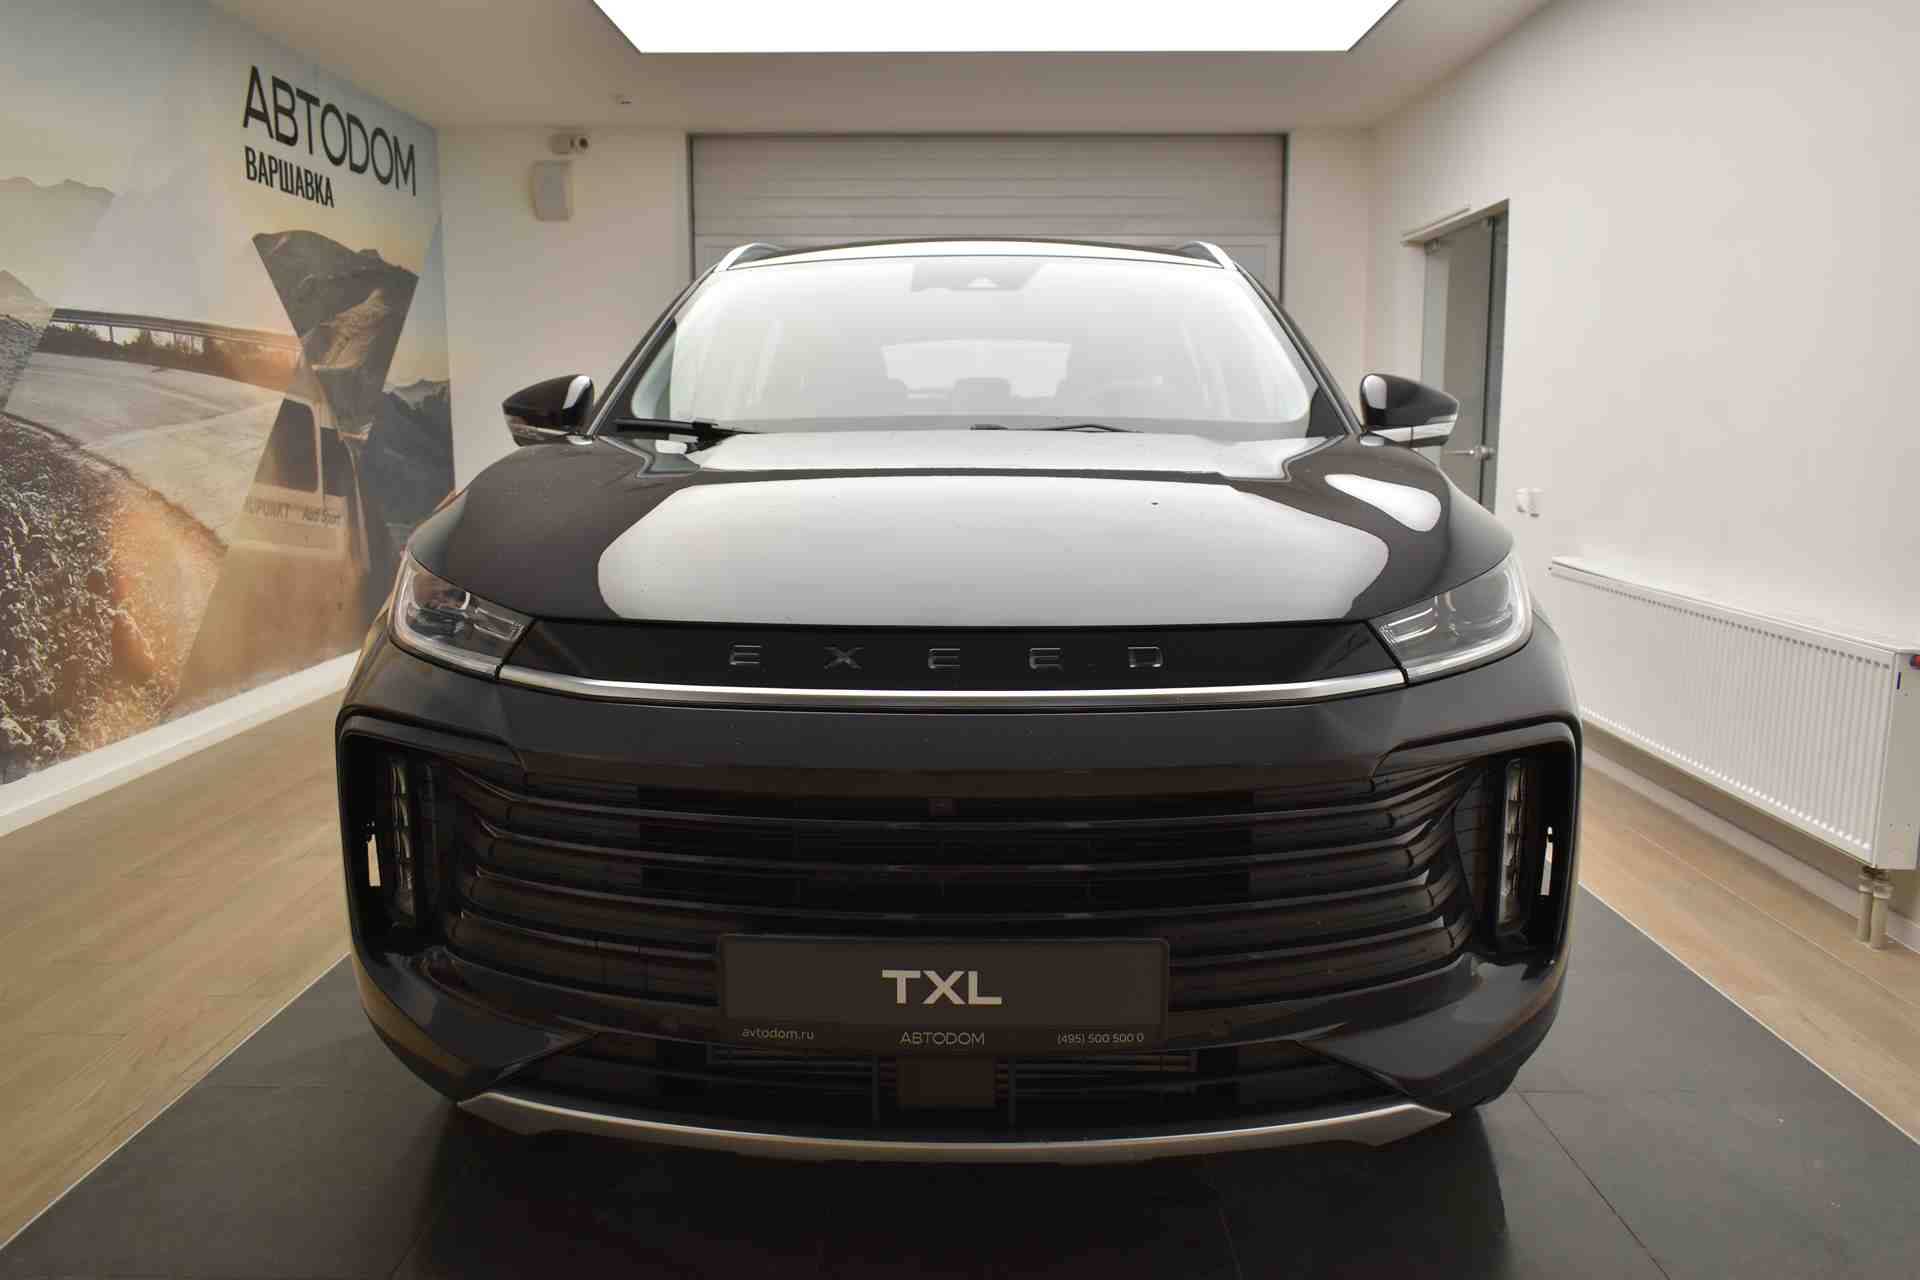 EXEED TXL Sport Edition 2.0 7DCT 4WD